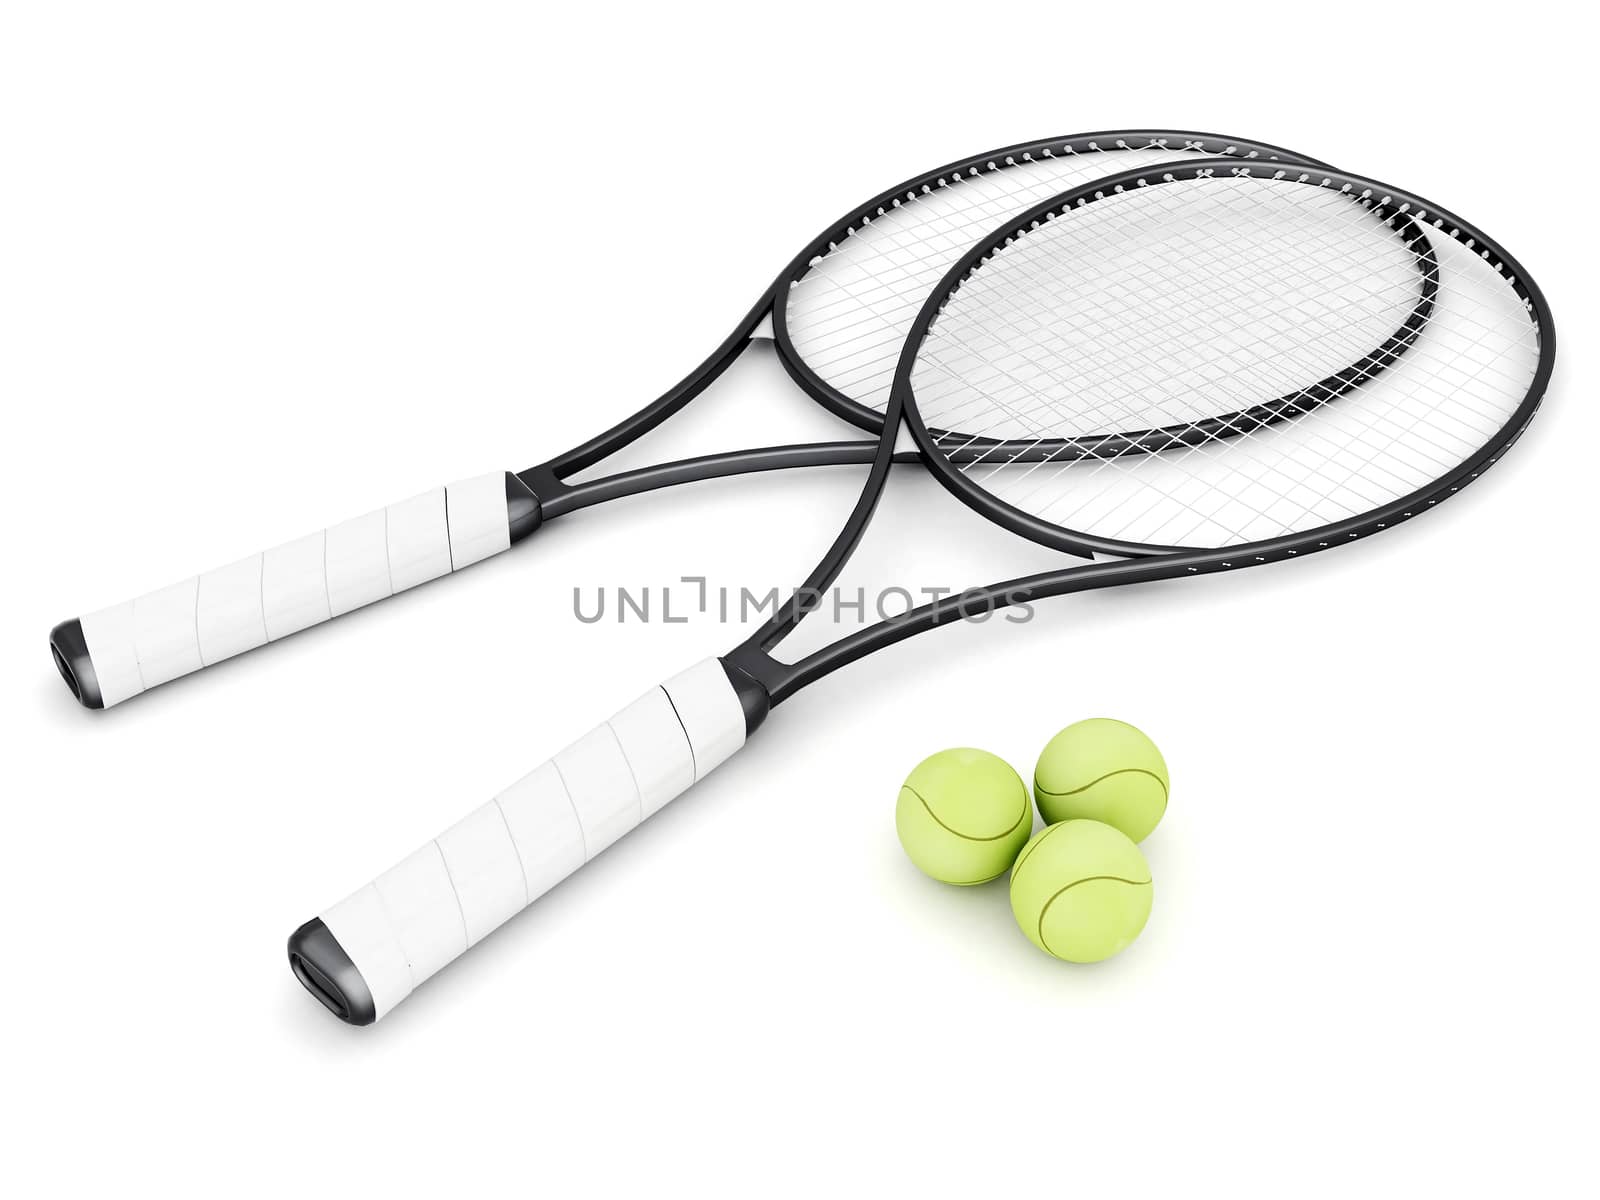 tennis equipment isolated on a white background